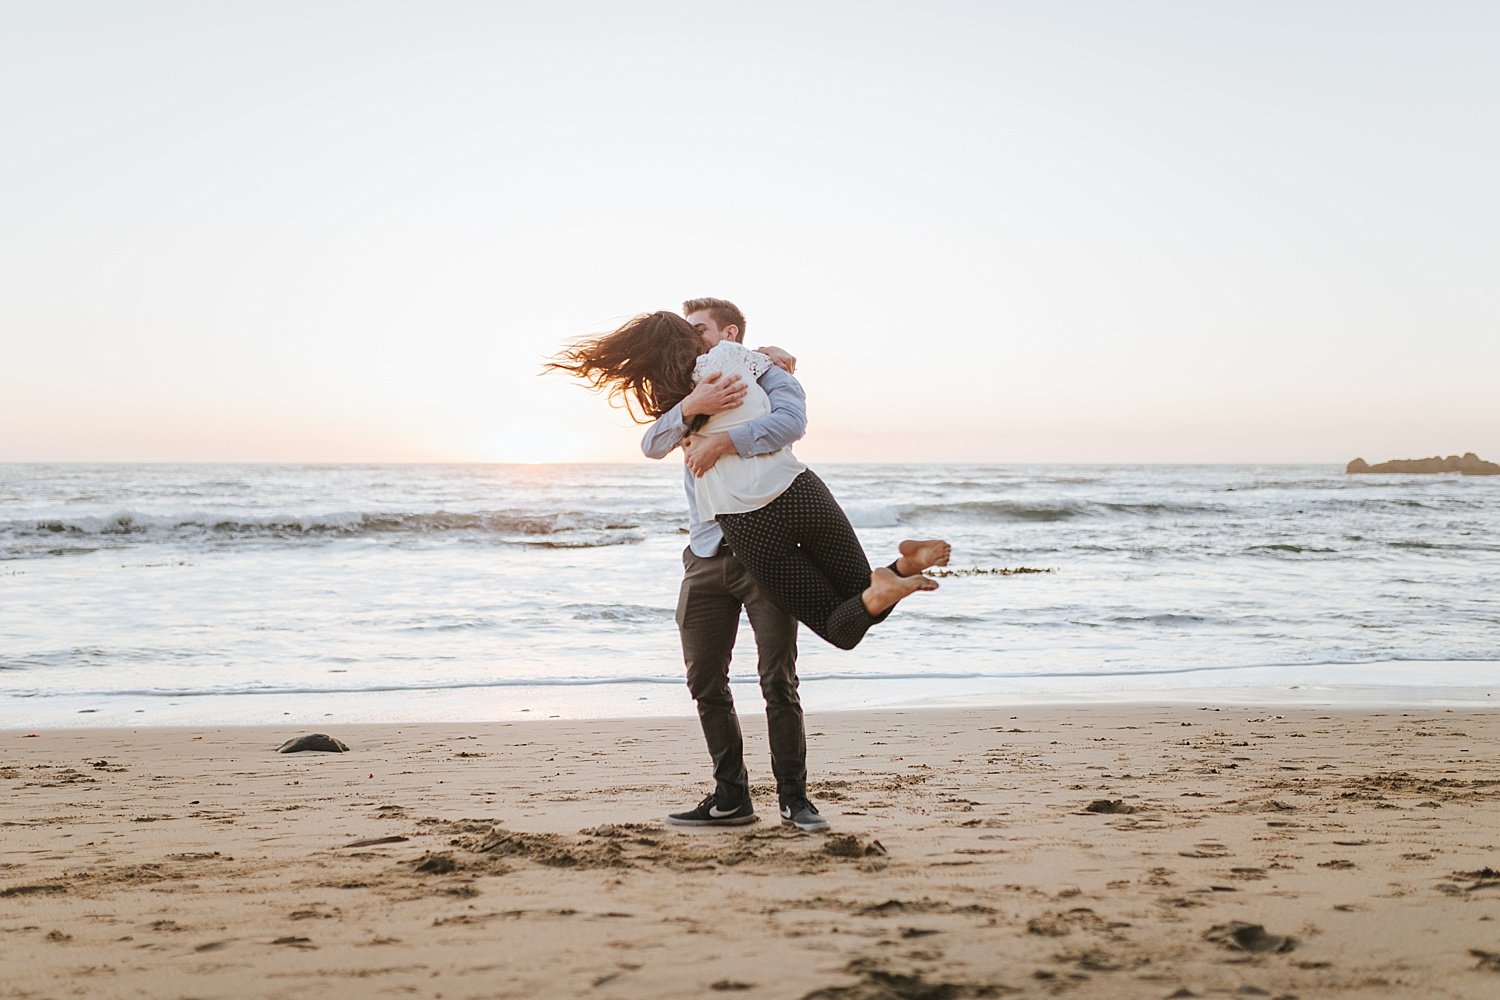 Sunset at Ritz Carlton Half Moon Bay is a perfect time to propose to your sweetheart. This beachy proposal and engagement shoot is so adorable and cute.